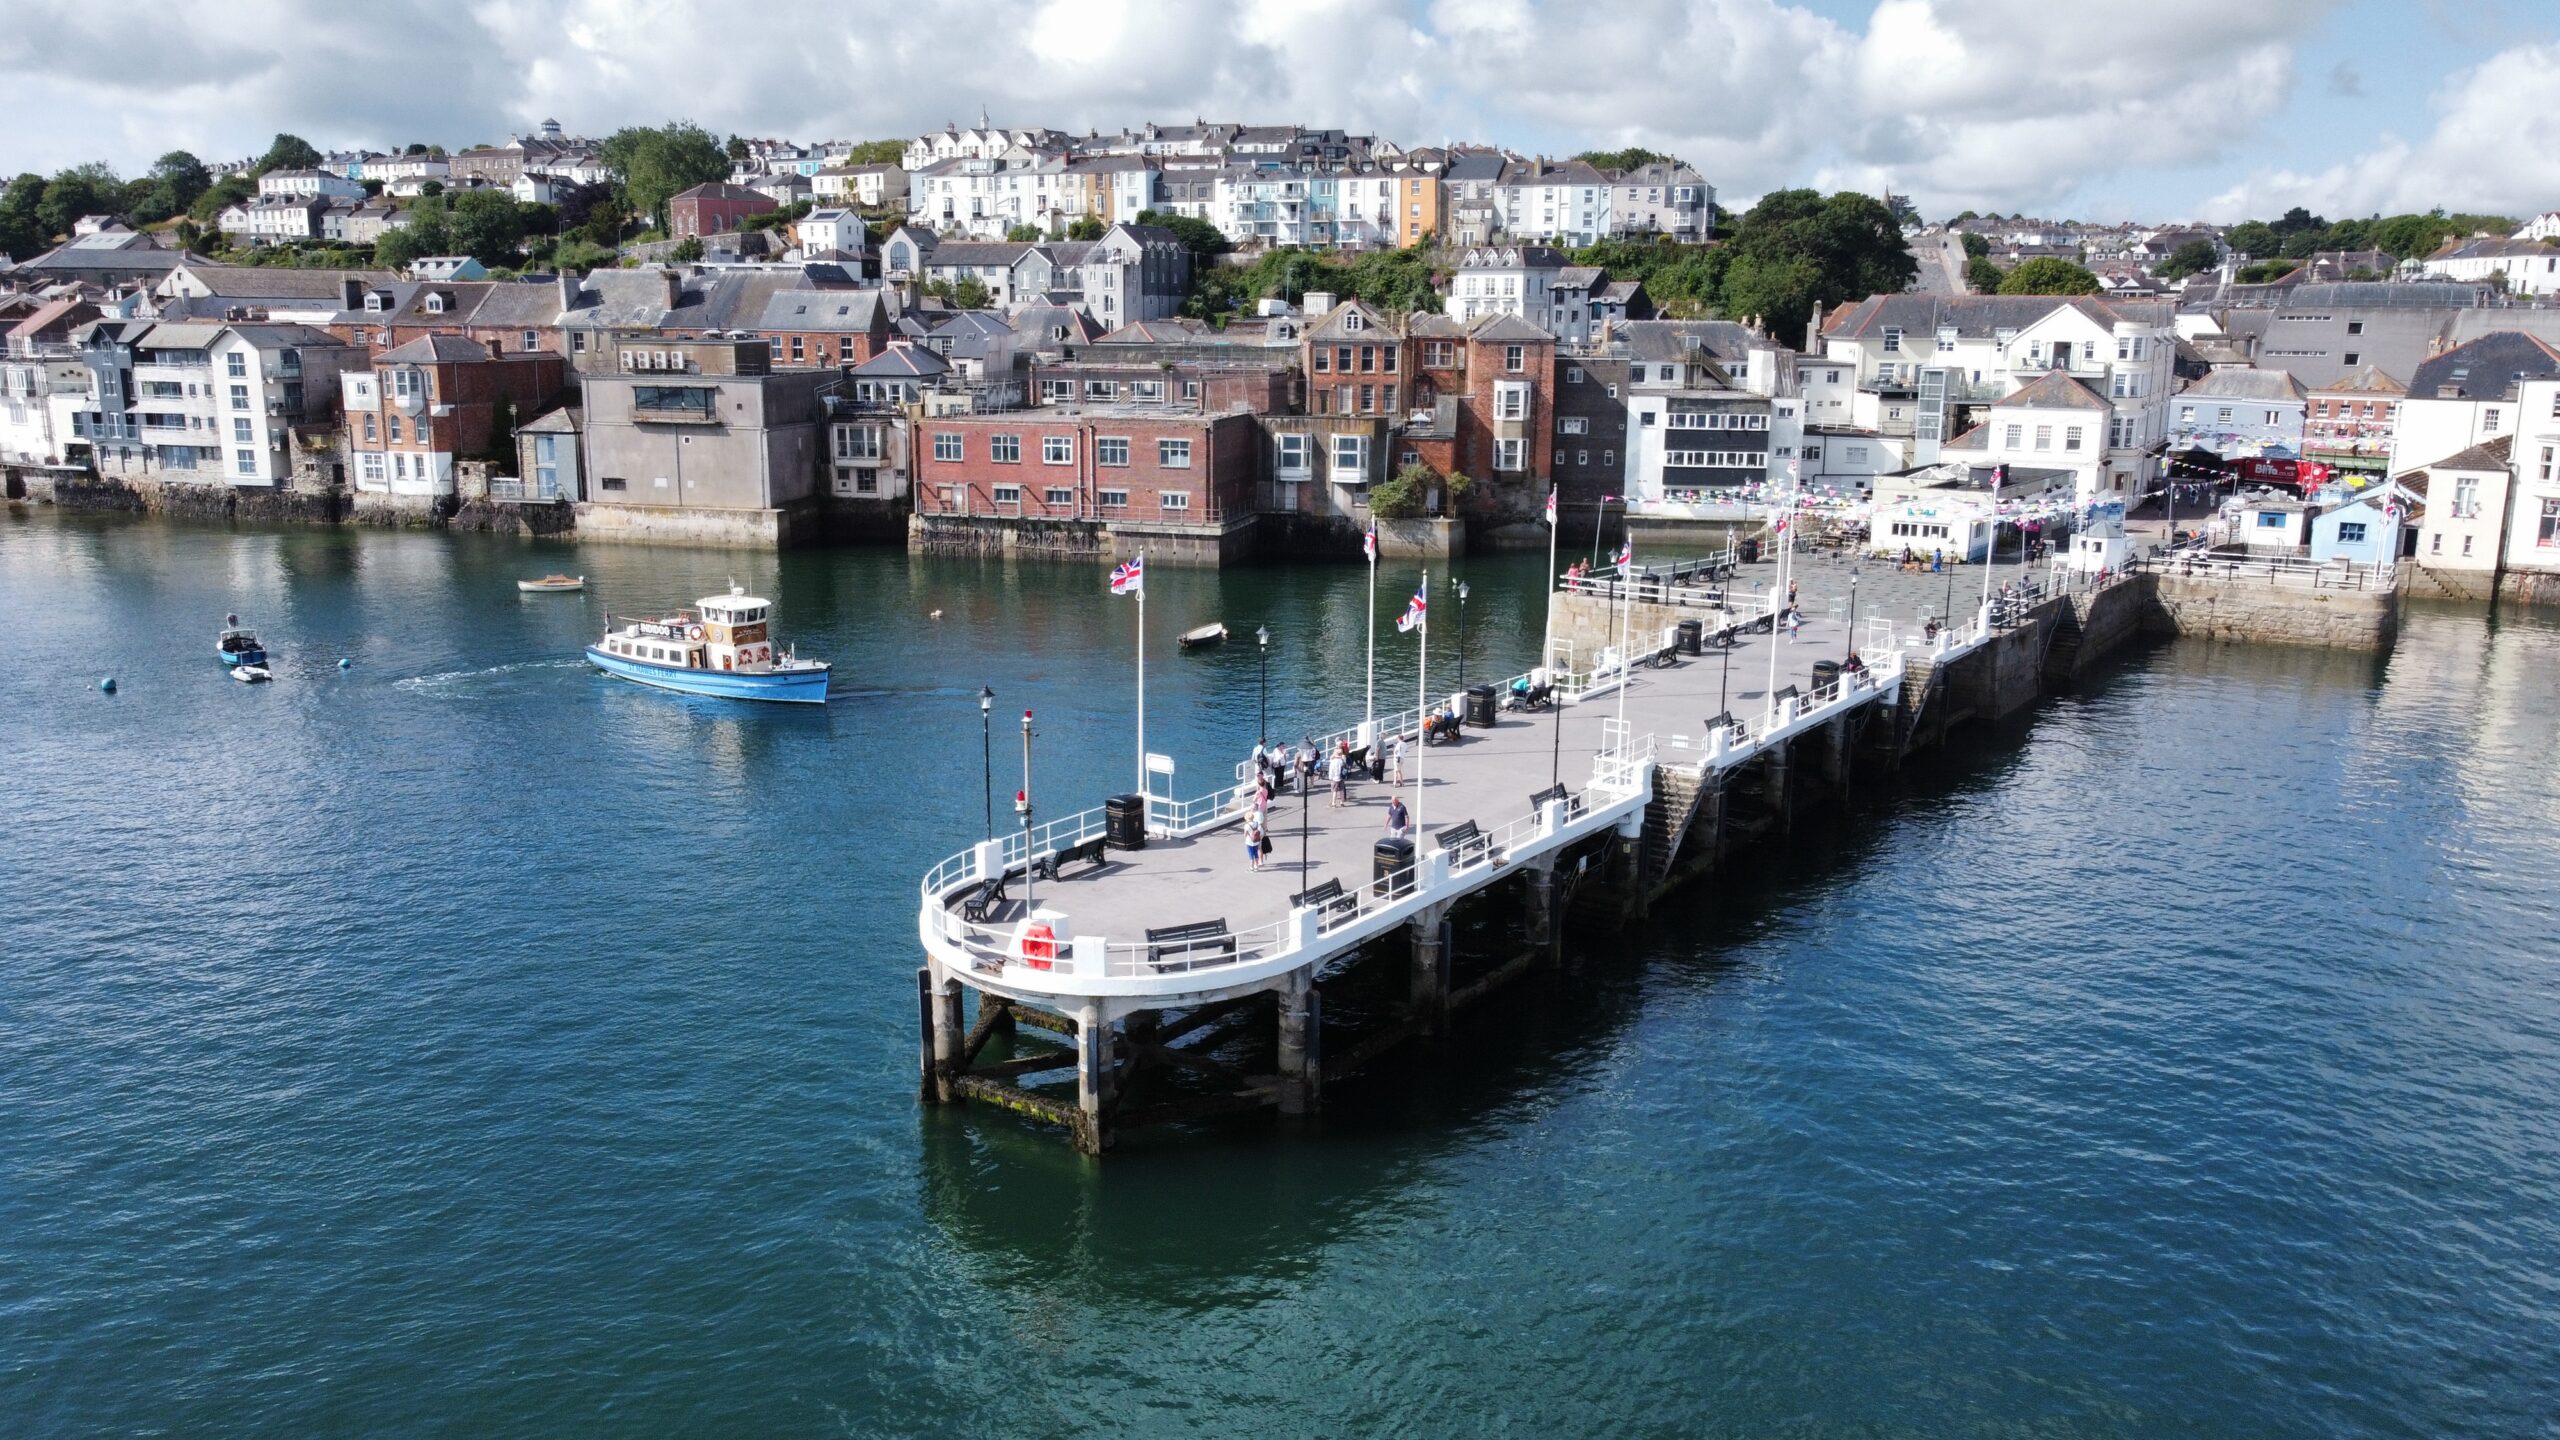 Prince of Wales Pier - Cornwall Harbours